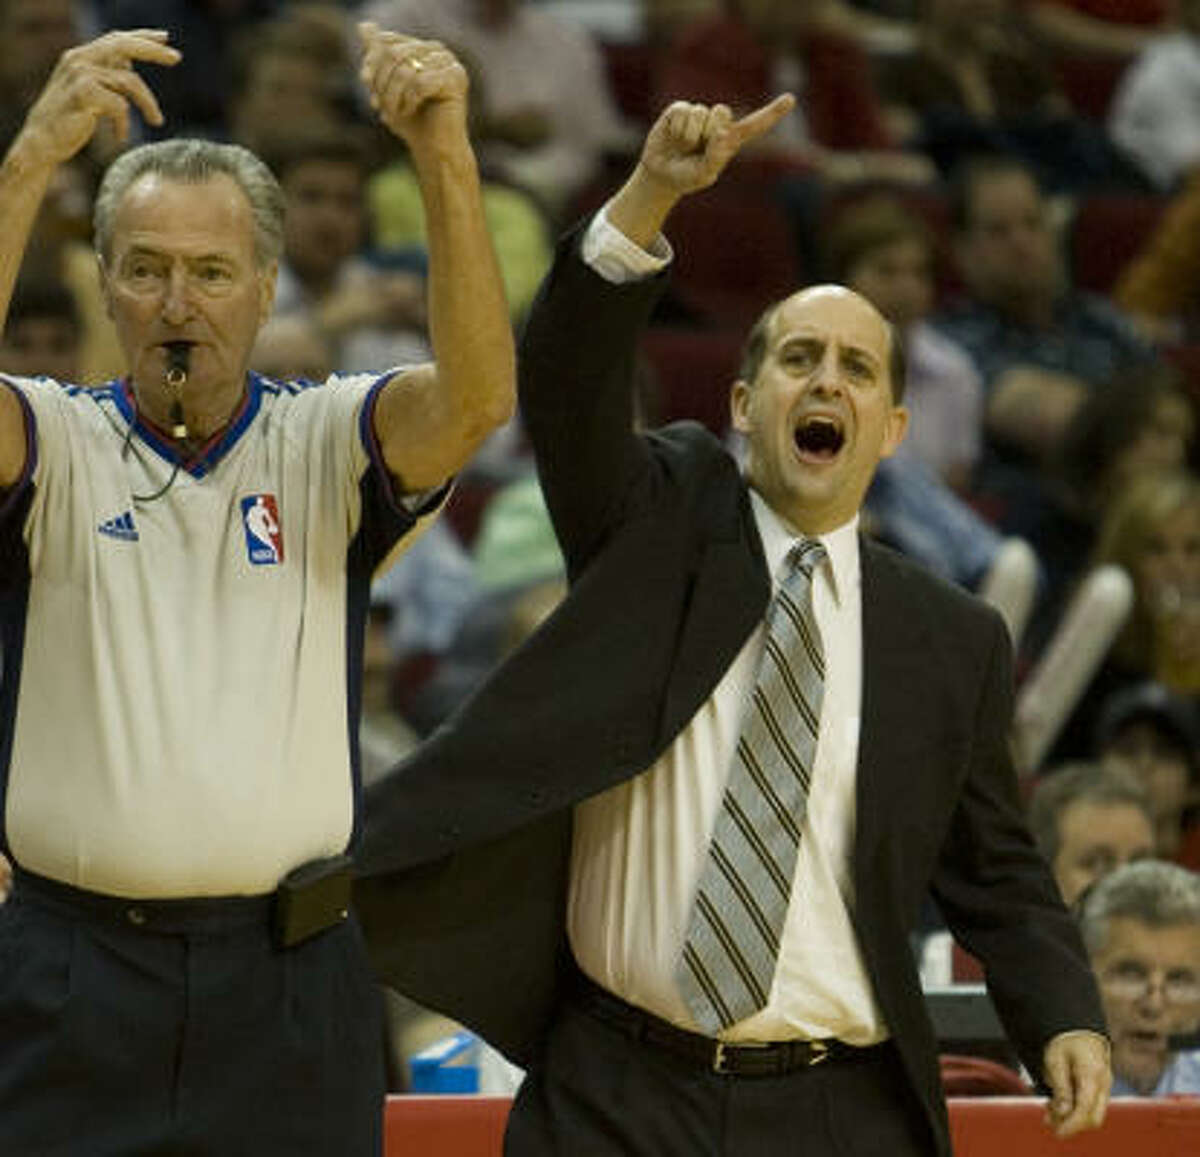 On Wednesday, former Rockets coach Jeff Van Gundy disputed the claims of disgraced former NBA official Tim Donaghy that the league manipulated results of games for financial reasons.